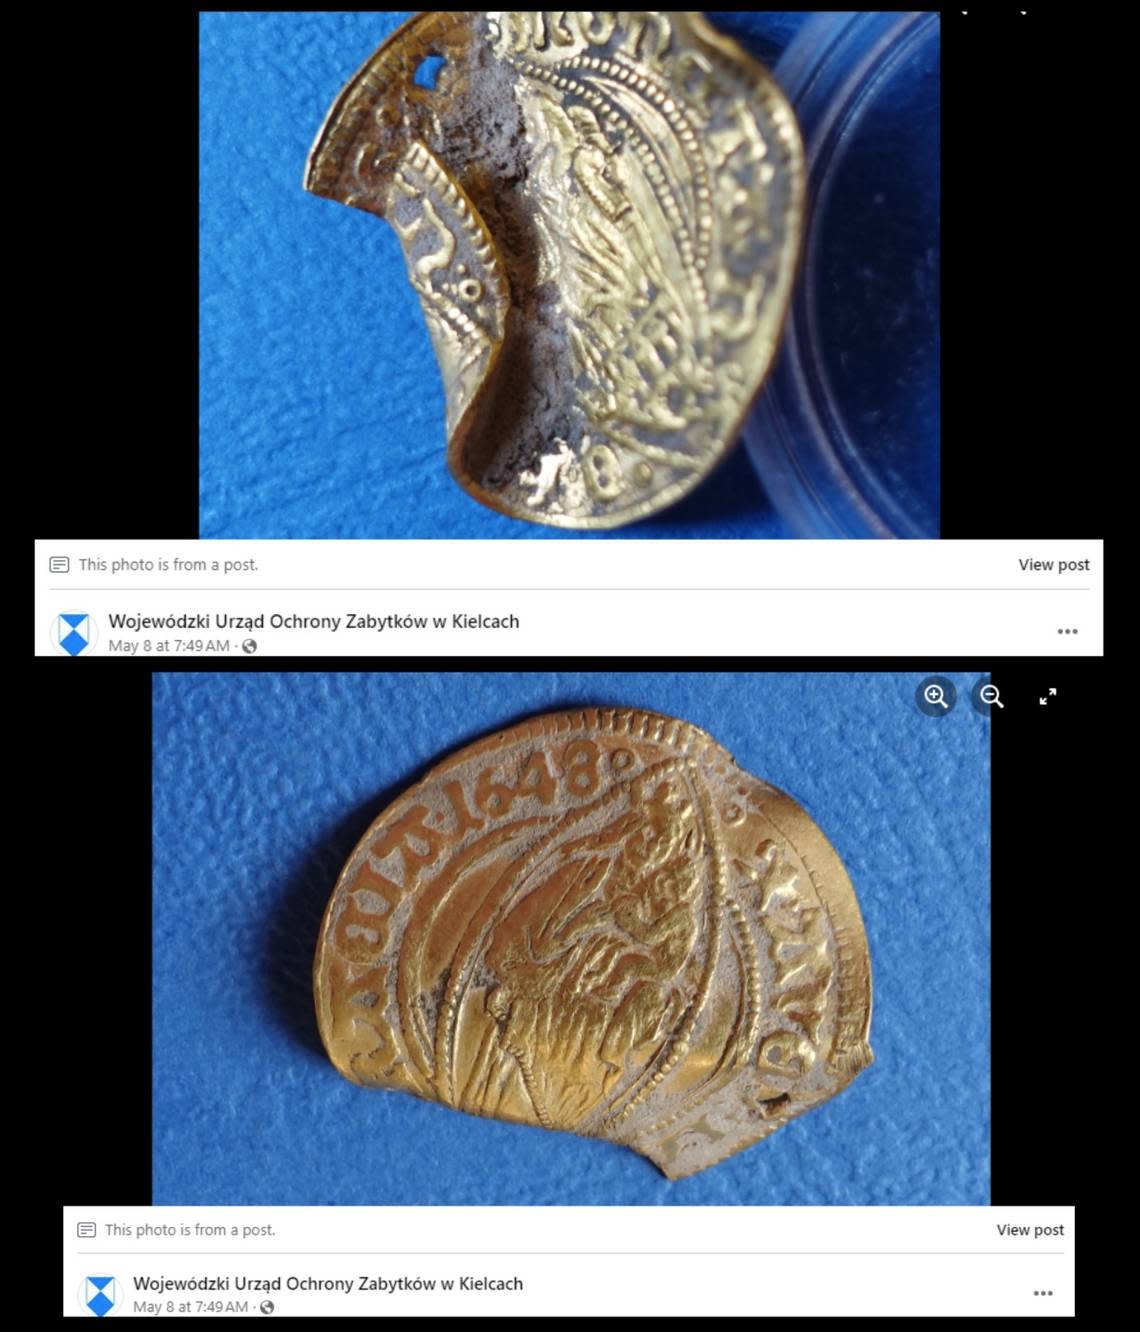 One coin, a gold Madonna and Child, has a hole punched near the edge, meaning it was likely worn as a medallion, officials said.